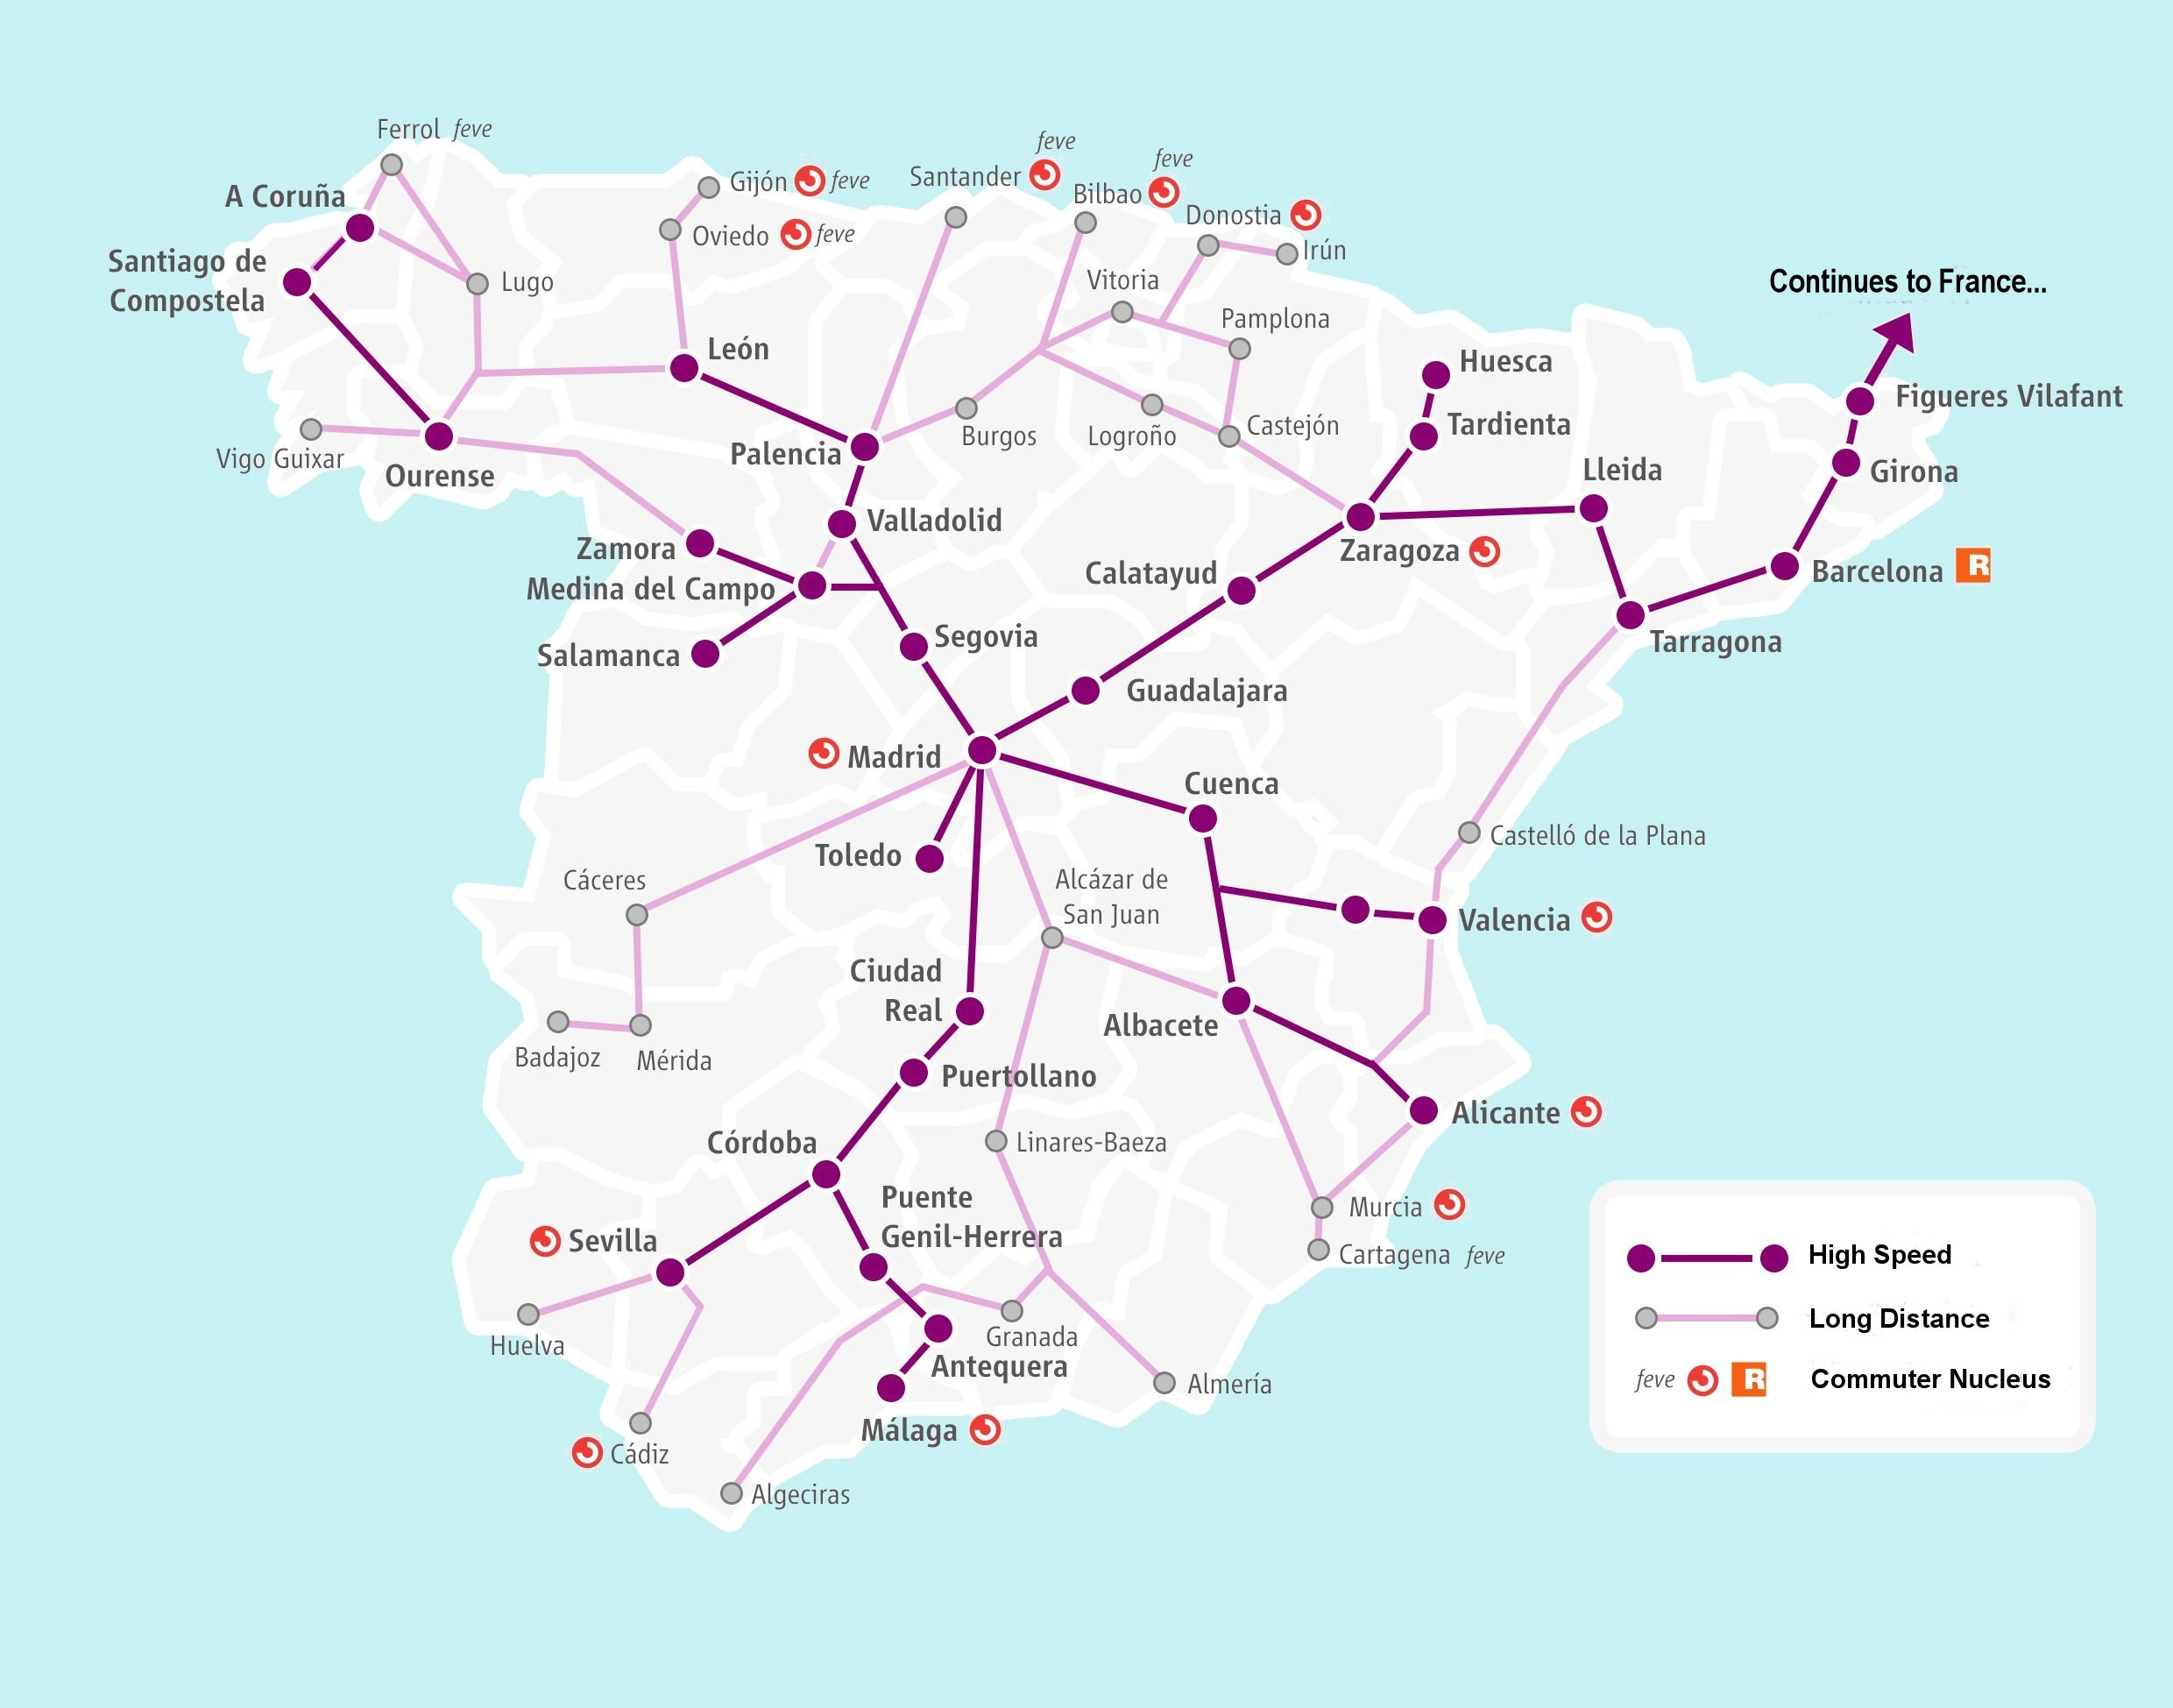 Renfe high speed and long distance routes map